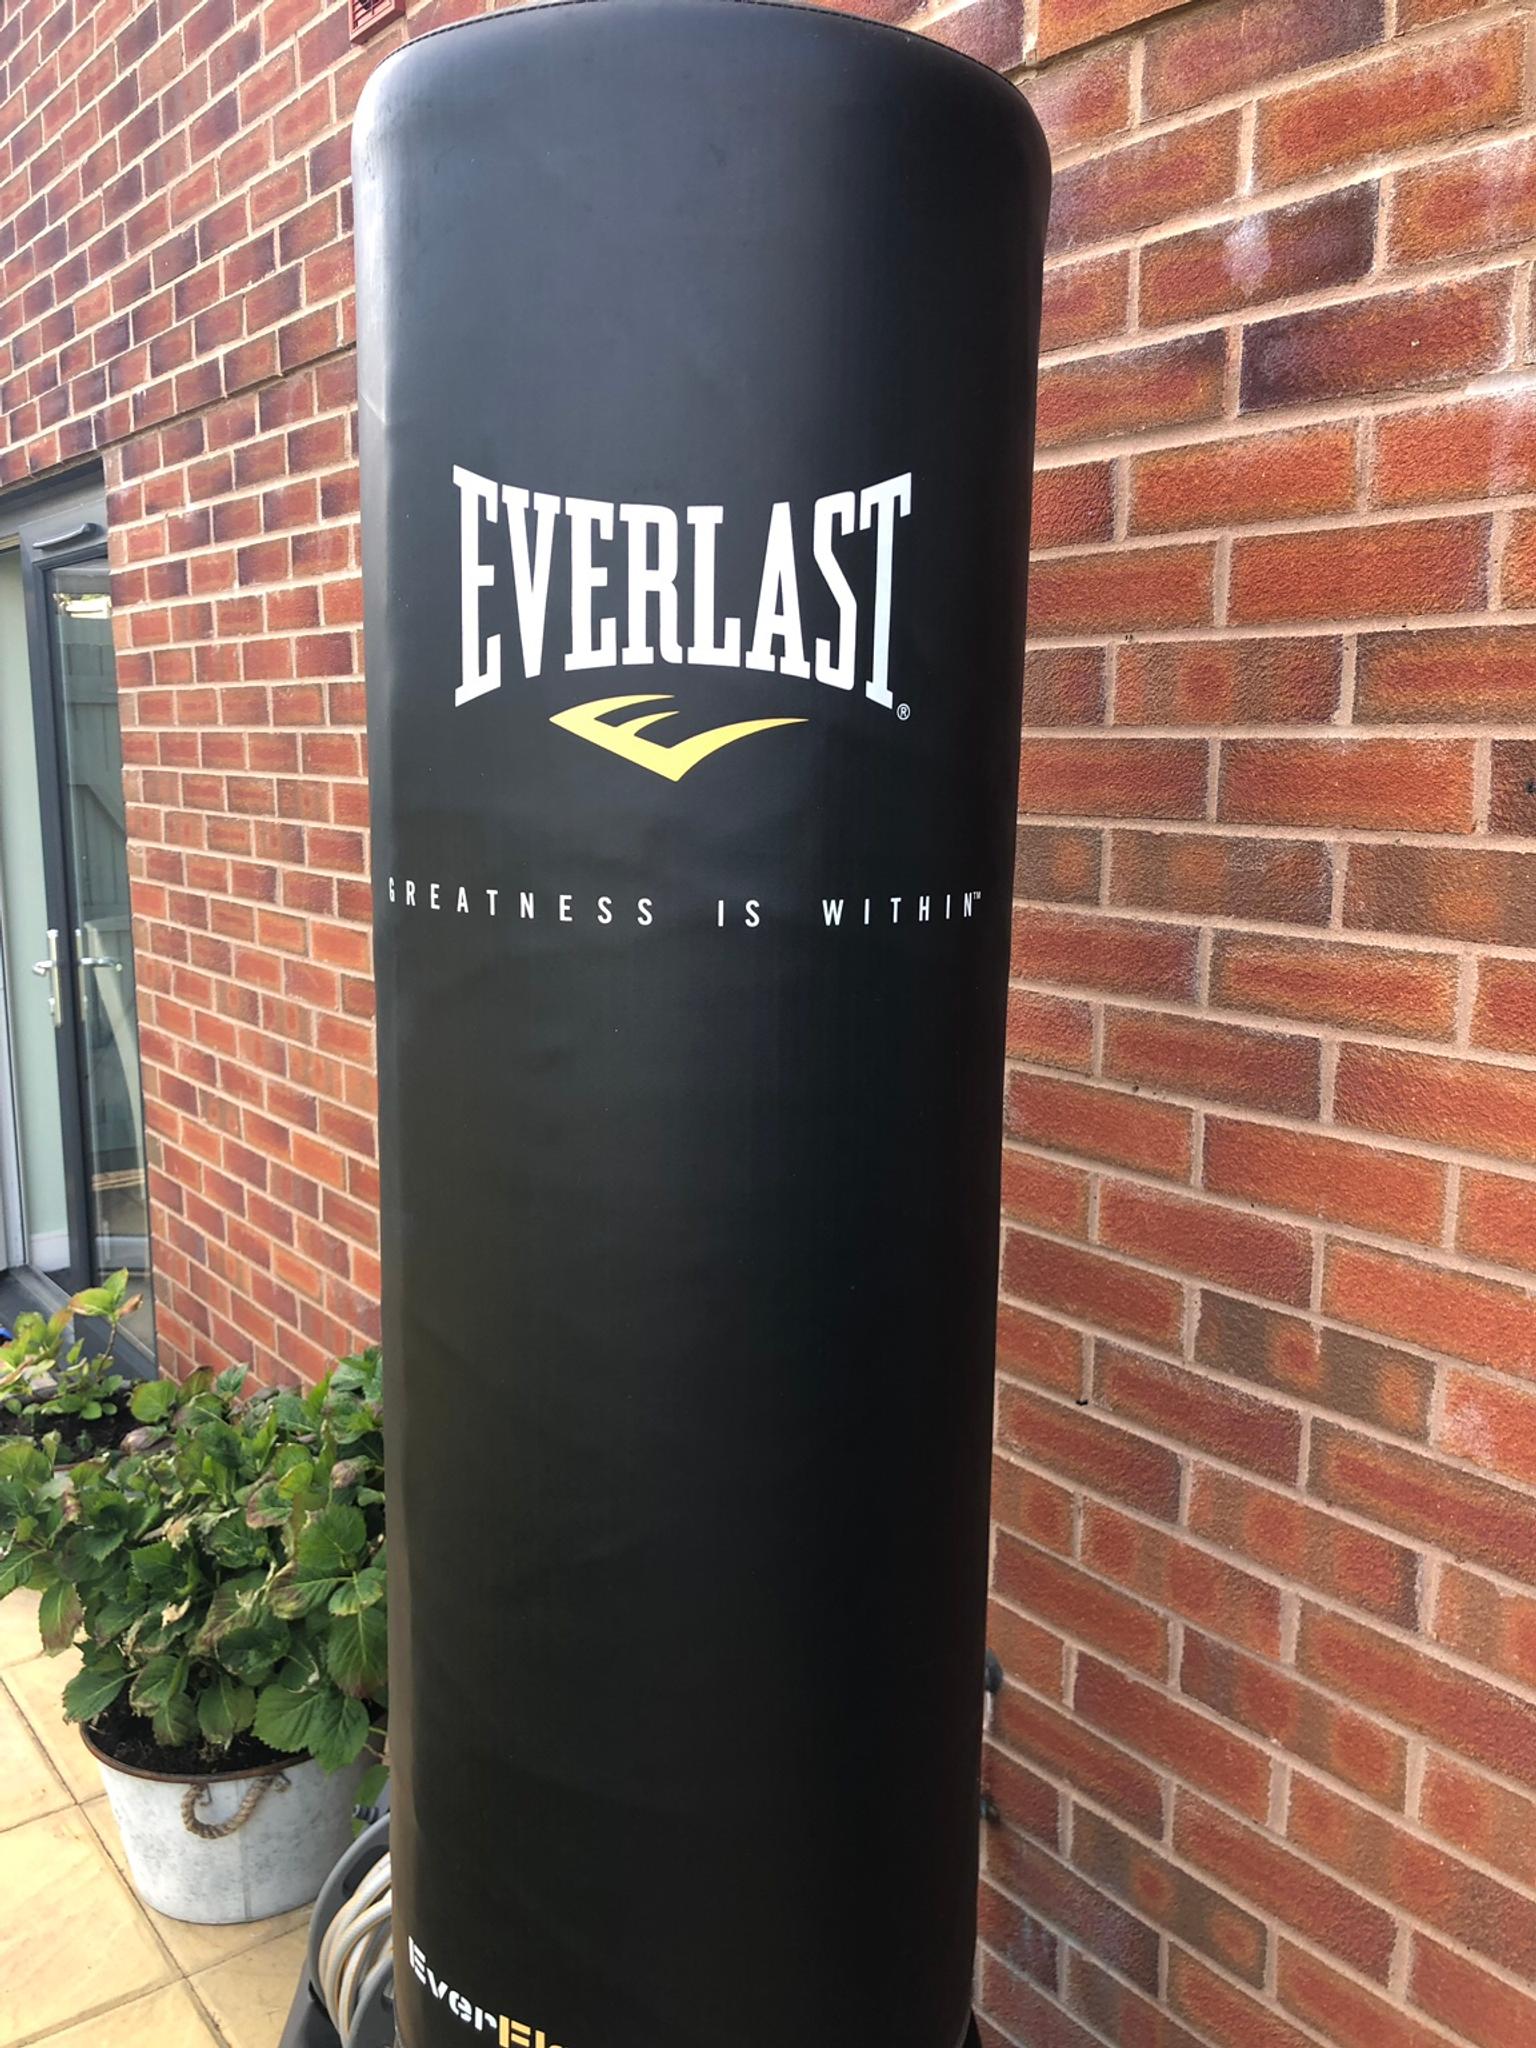 Everlast Pro Everflex free standing punch bag in B69 Sandwell for £80.00 for sale | Shpock